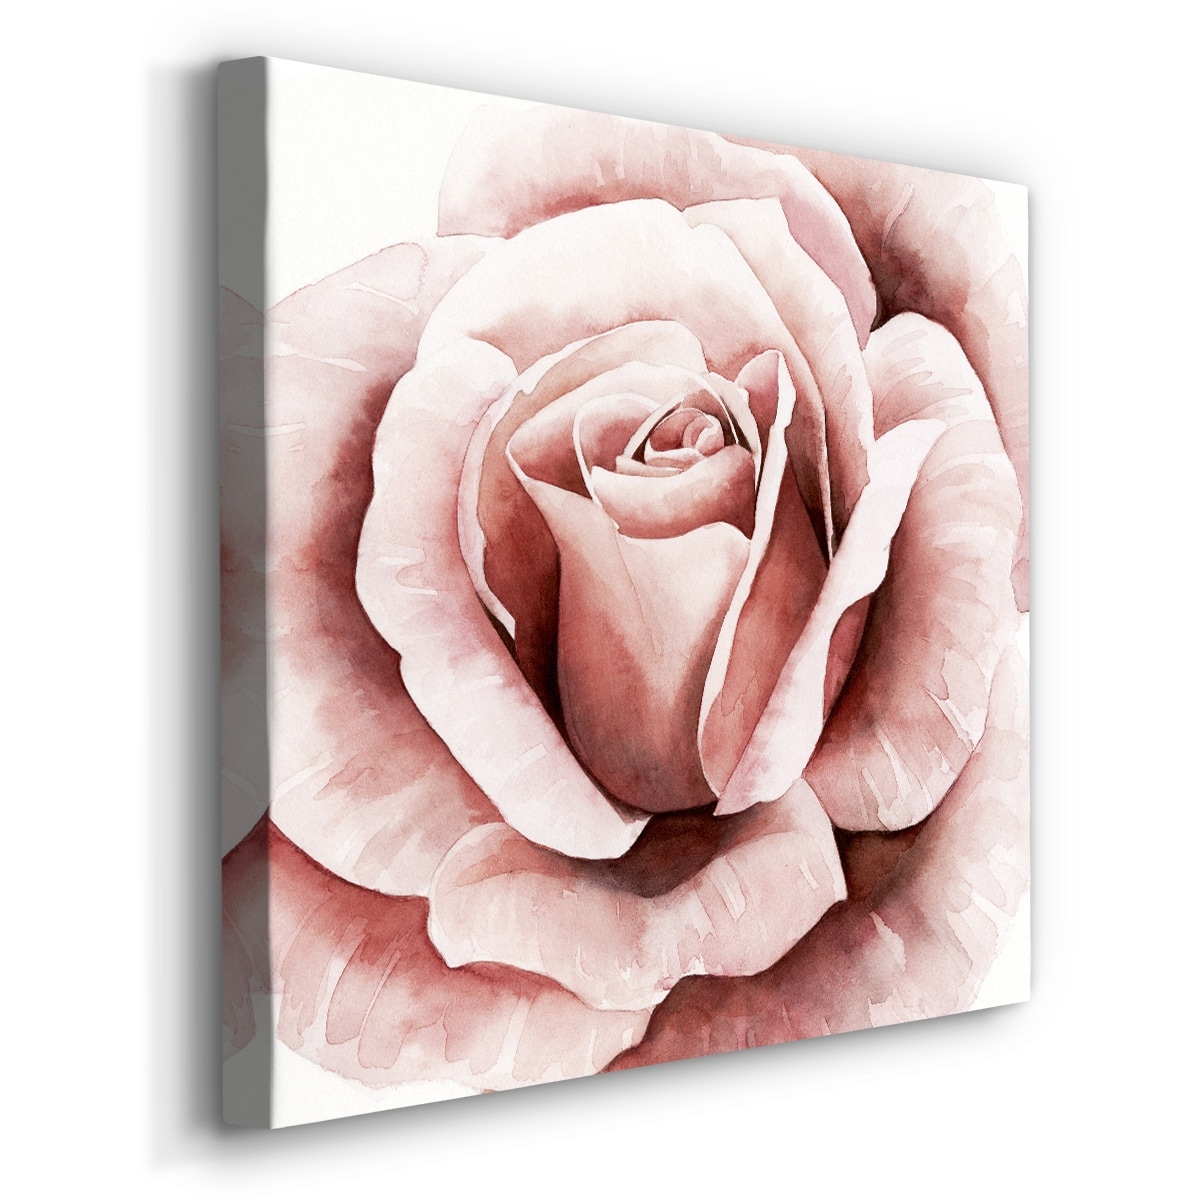 Pink Rose Canvas Wall Art, Flower Decor - Canvas Gallery Wrap in Multiple Print Sizes - 'Pink and Shabby' by Offley Green 16x20